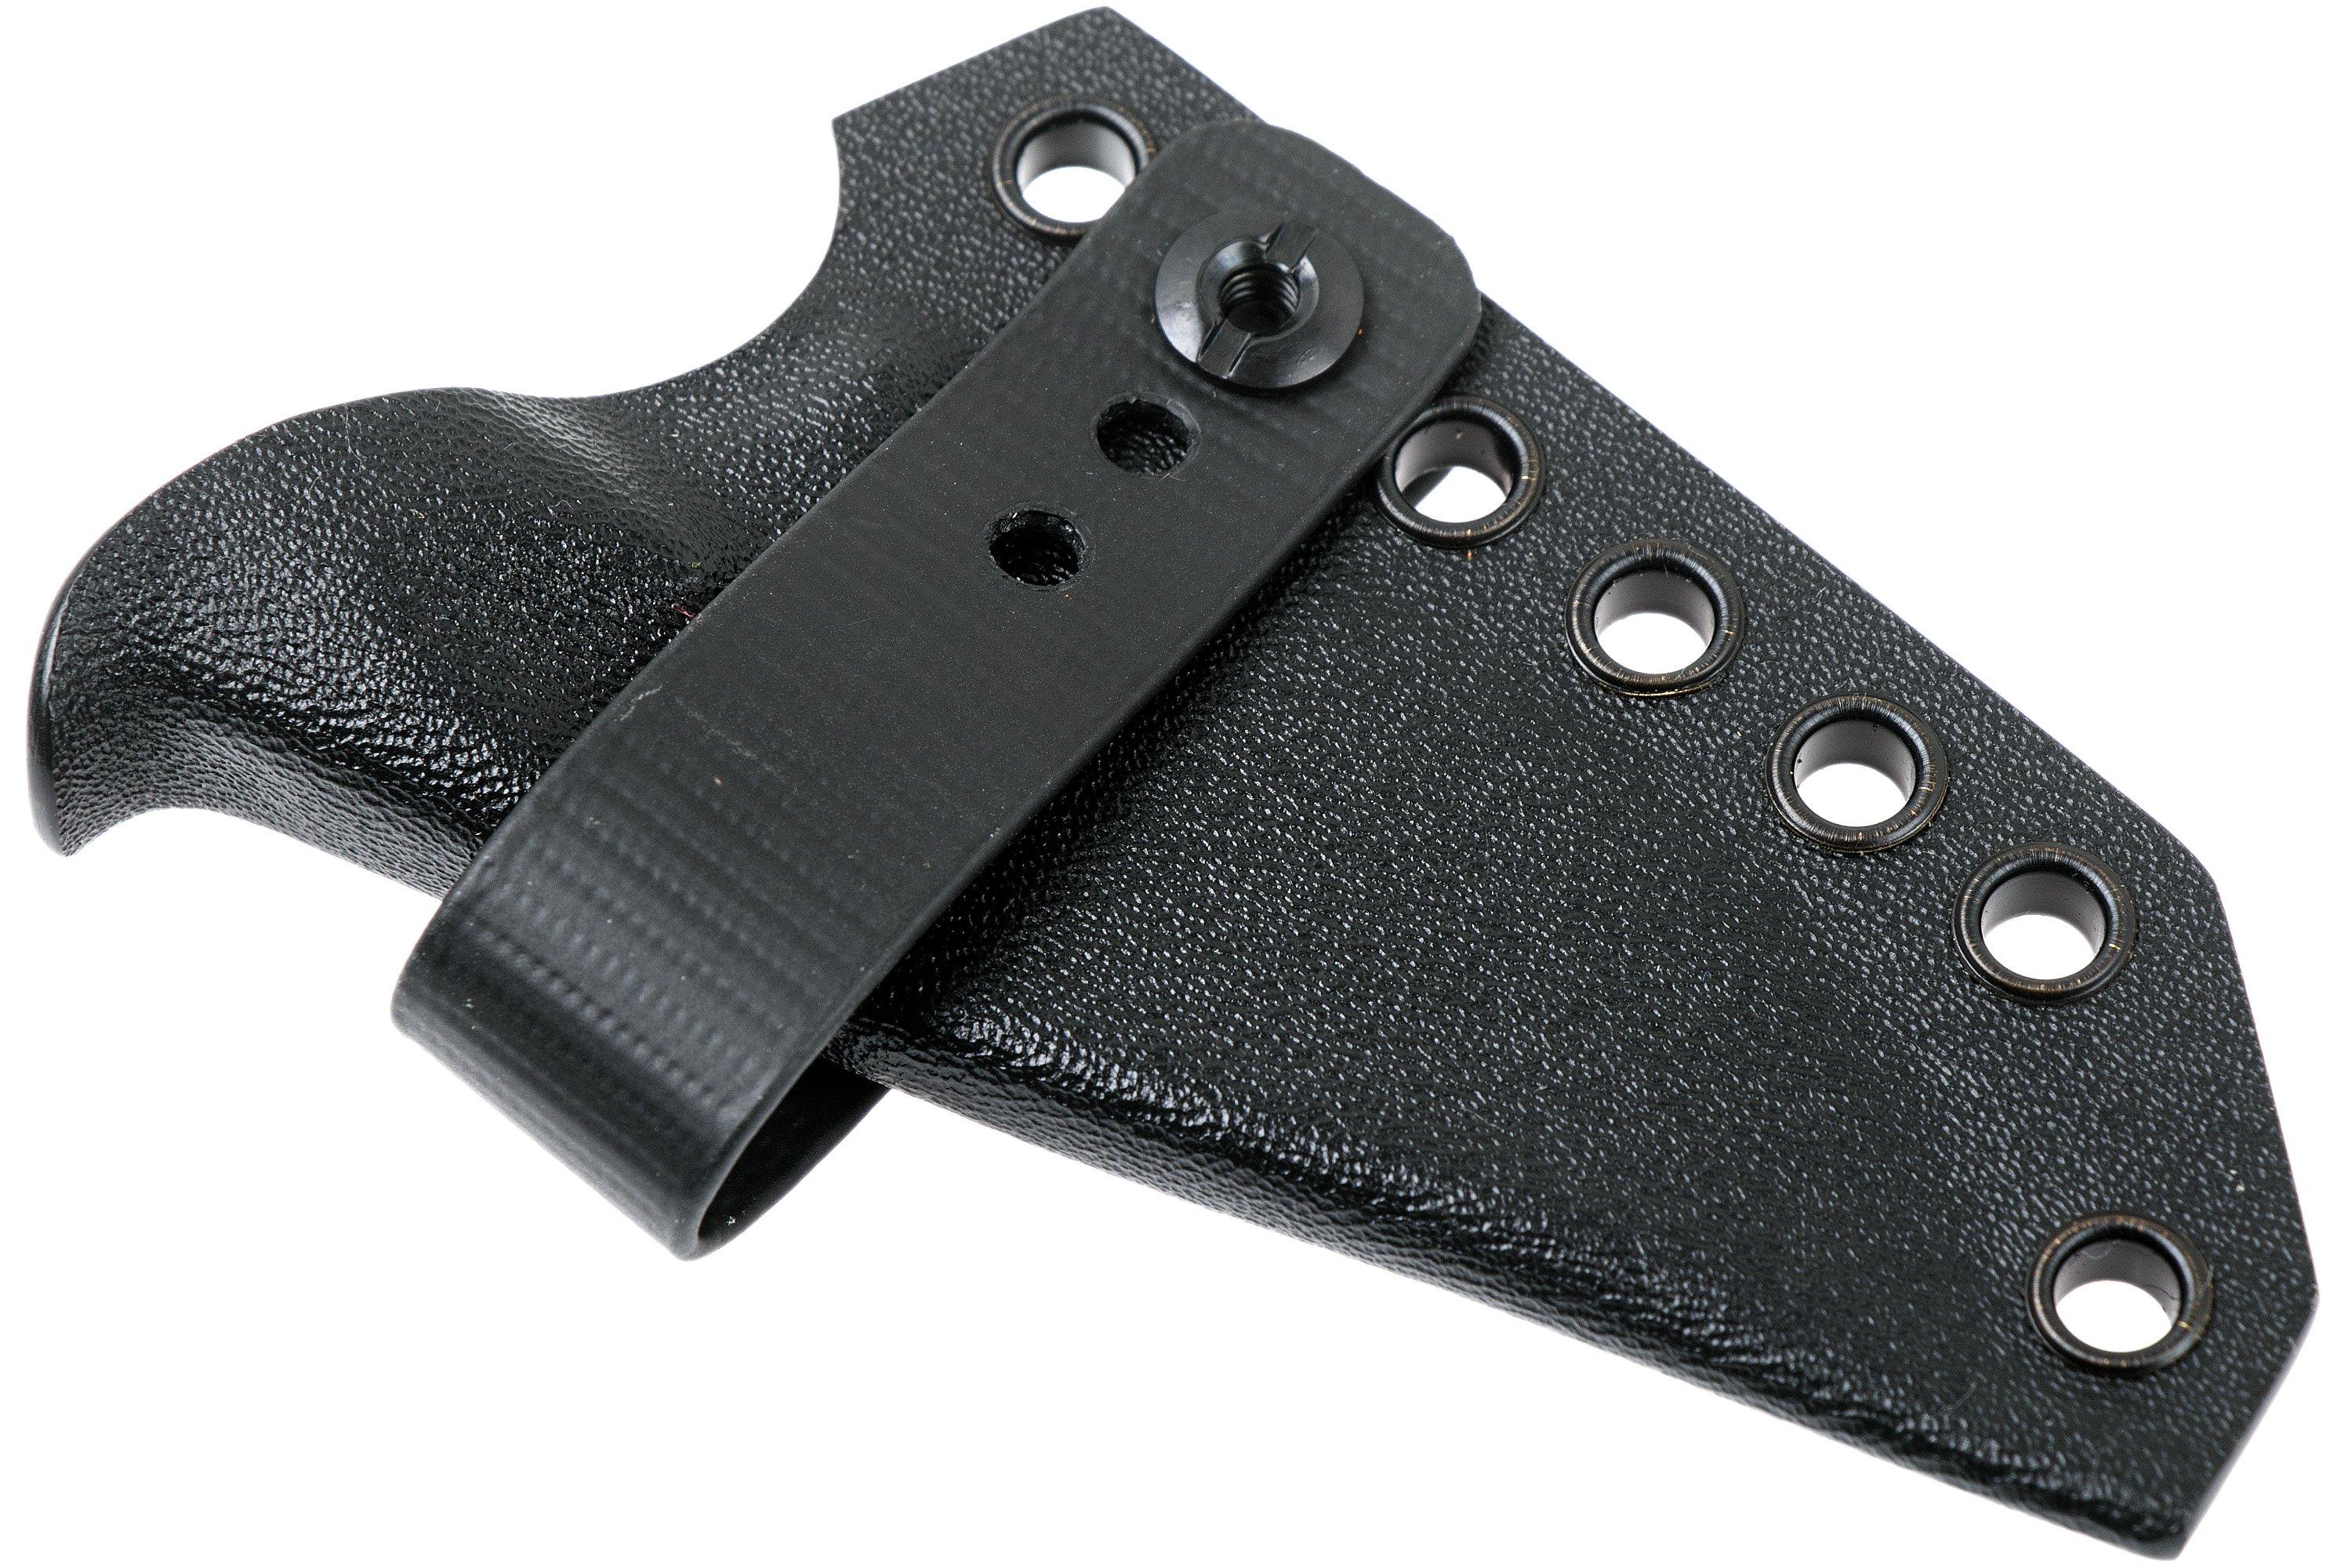 Armatus Carry Architect sheath for the Benchmade Hidden Canyon DW ...